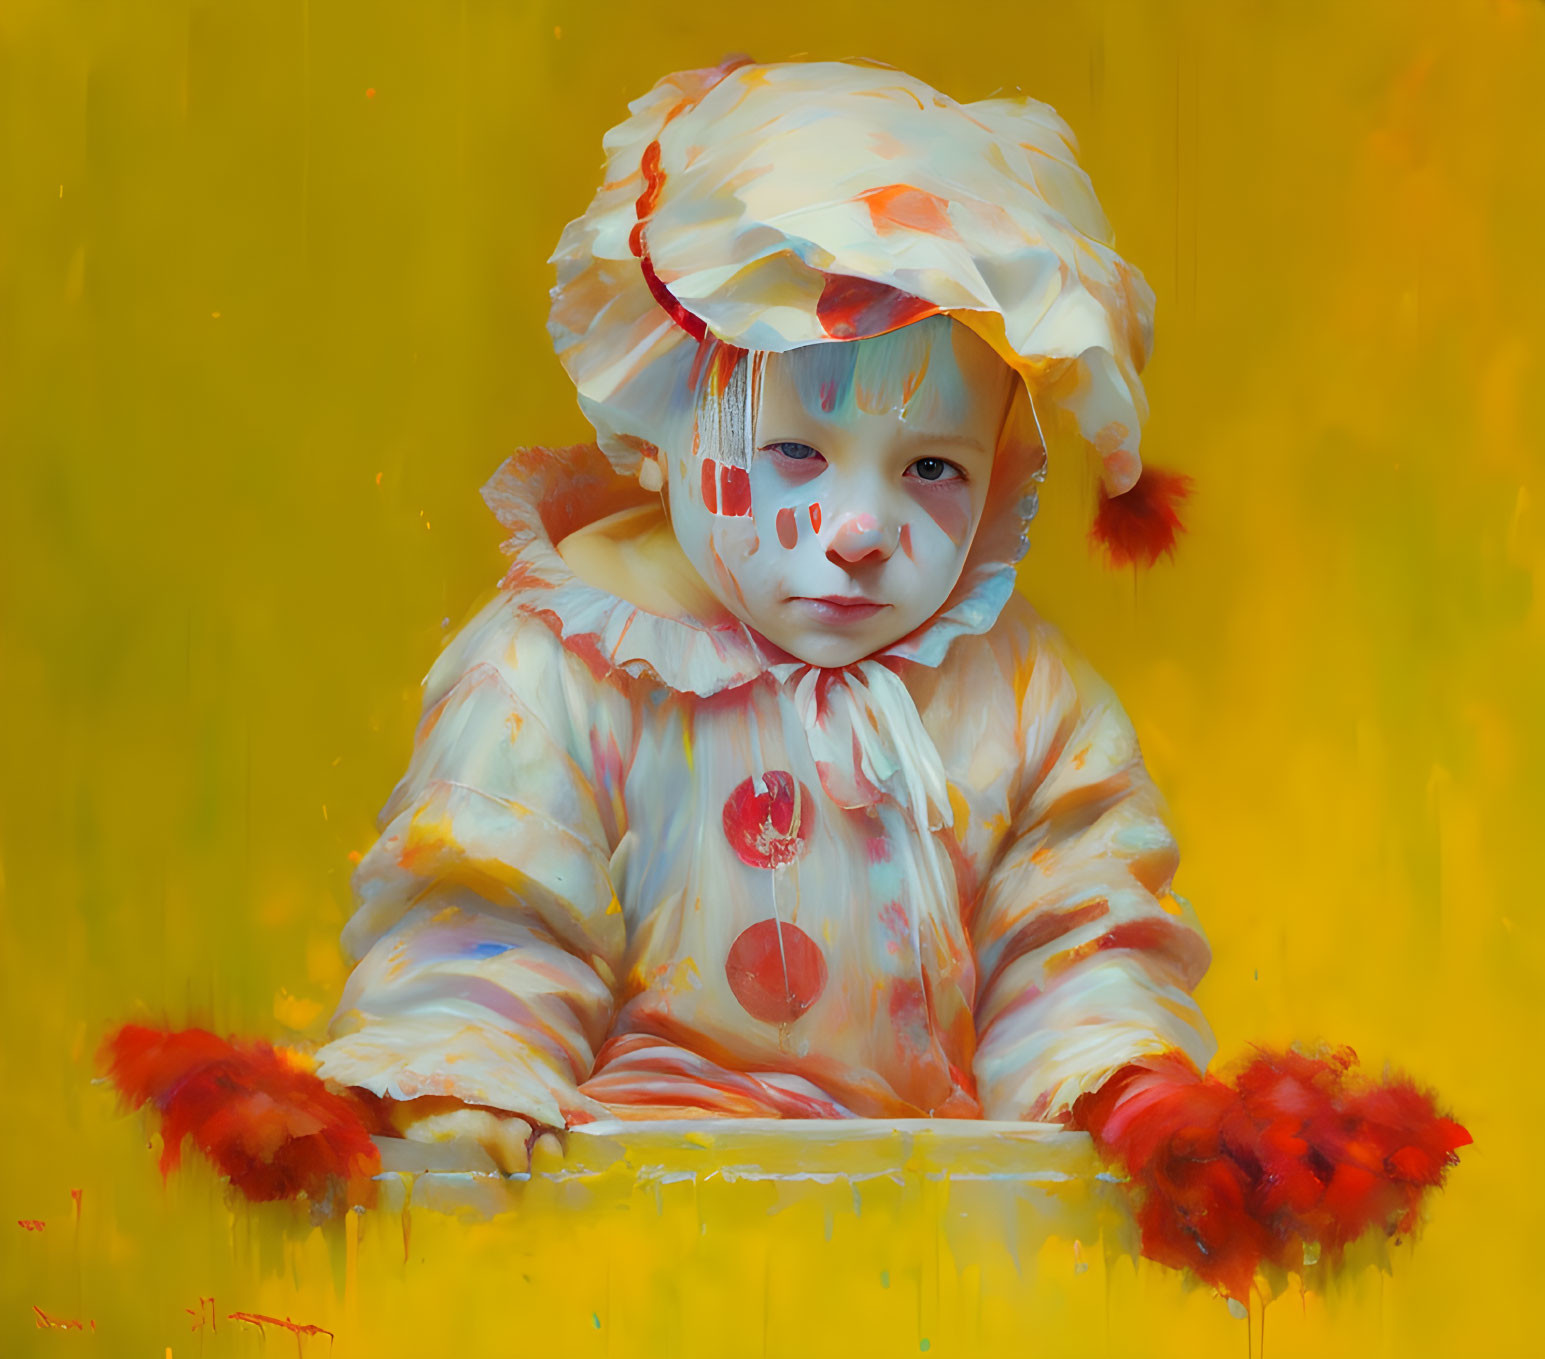 Child in White Costume with Red Polka Dots on Yellow Background